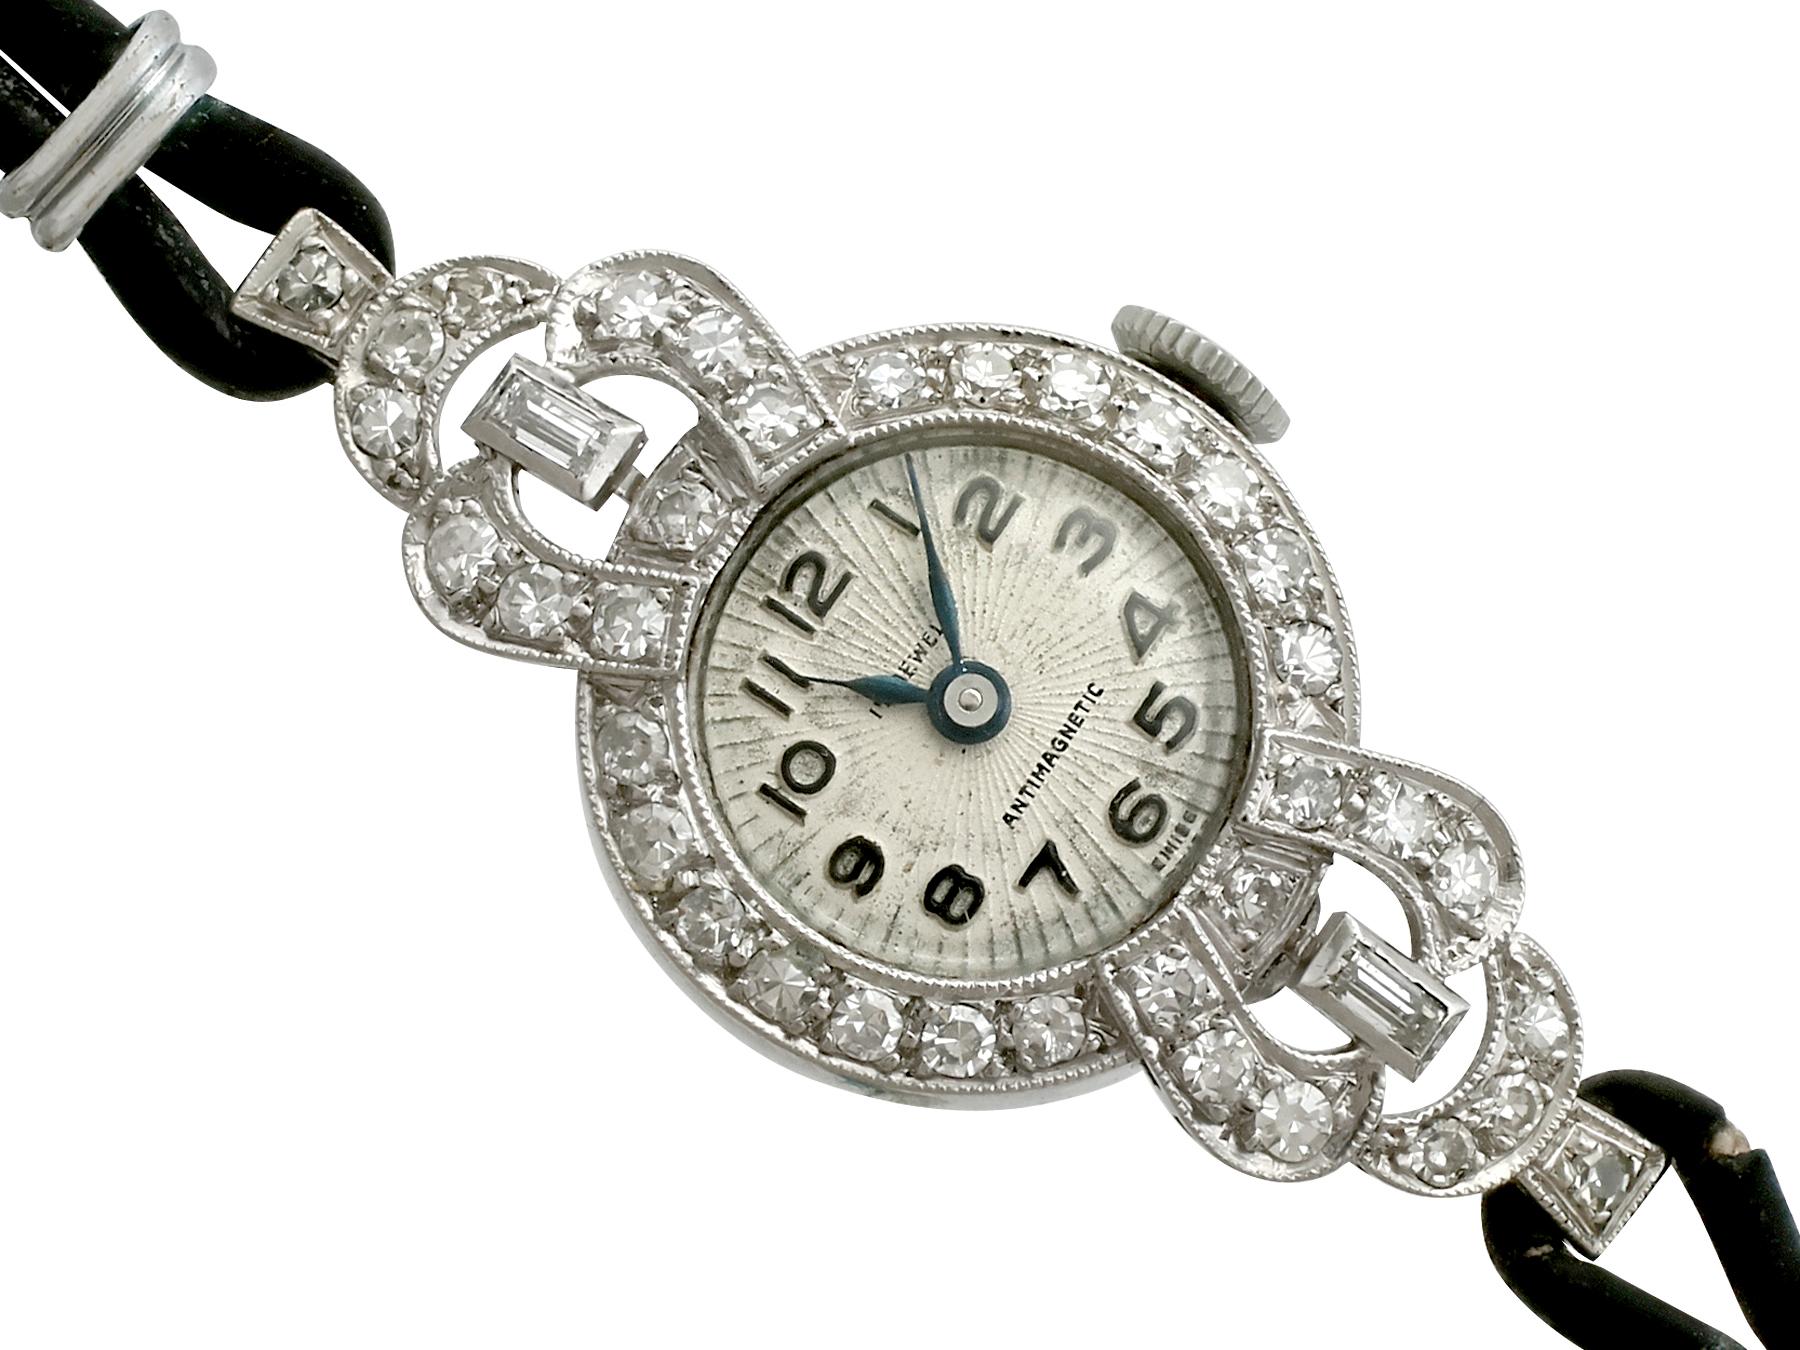 A fine Art Deco cocktail watch in platinum with 1.42 carat (total) diamonds; part of our antique jewelry and estate jewelry collections

This impressive antique Art Deco style ladies watch has been crafted in platinum.

The 1930s cocktail watch has